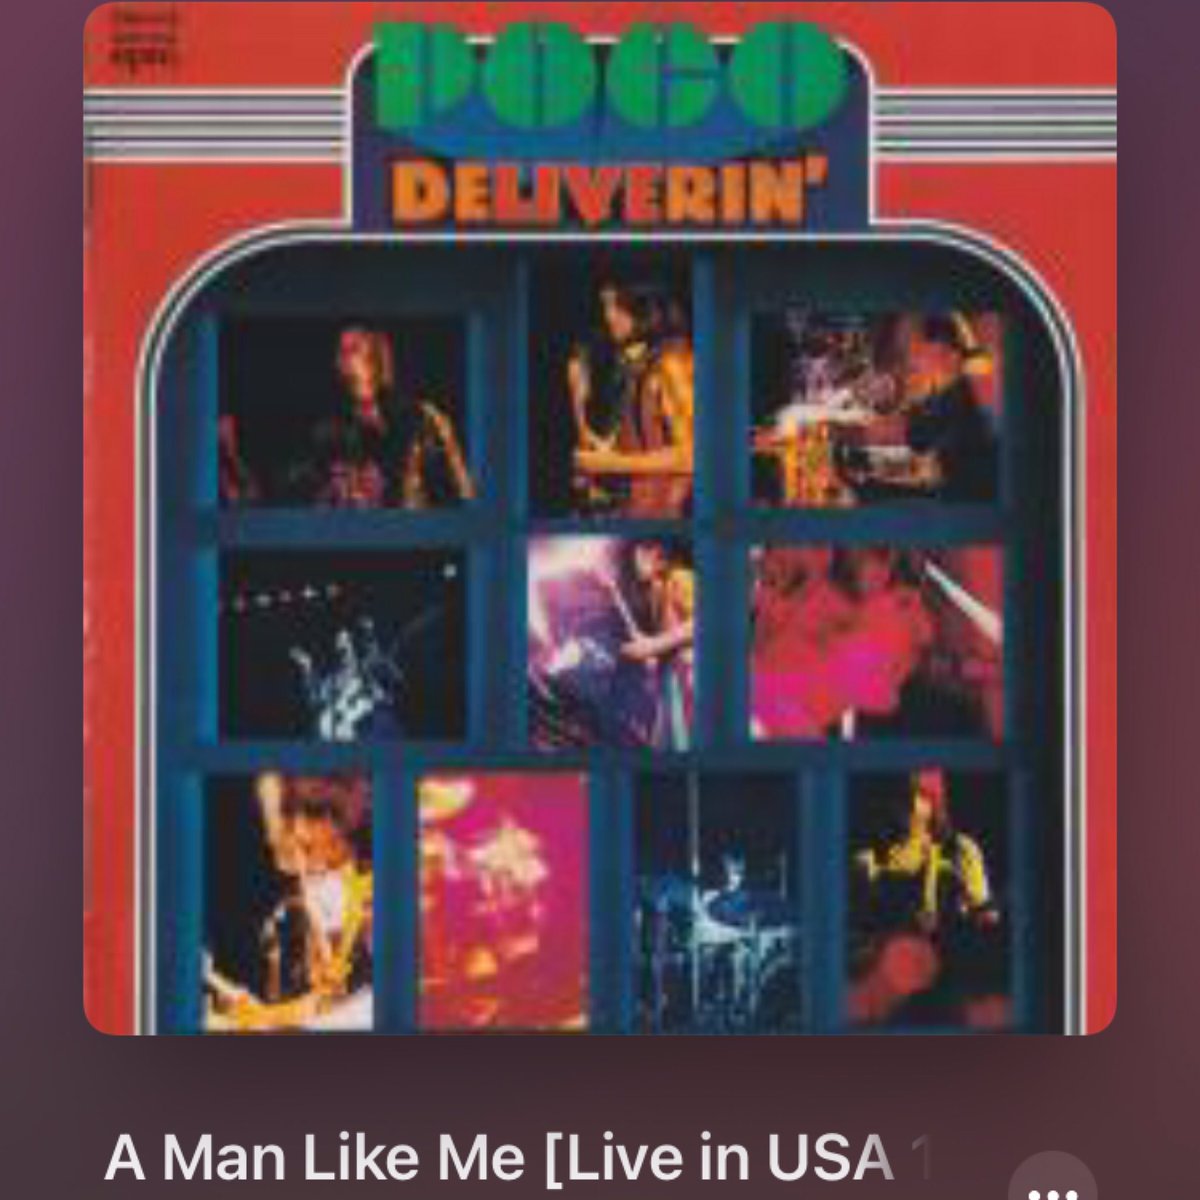 #NowPlaying
🎵 A Man Like Me [Live in USA 1970]
by 🎵 Poco
from 🎵 Deliverin'
#RustyYoung #70s #1970
#CRT #countryrock 
#RichieFuray